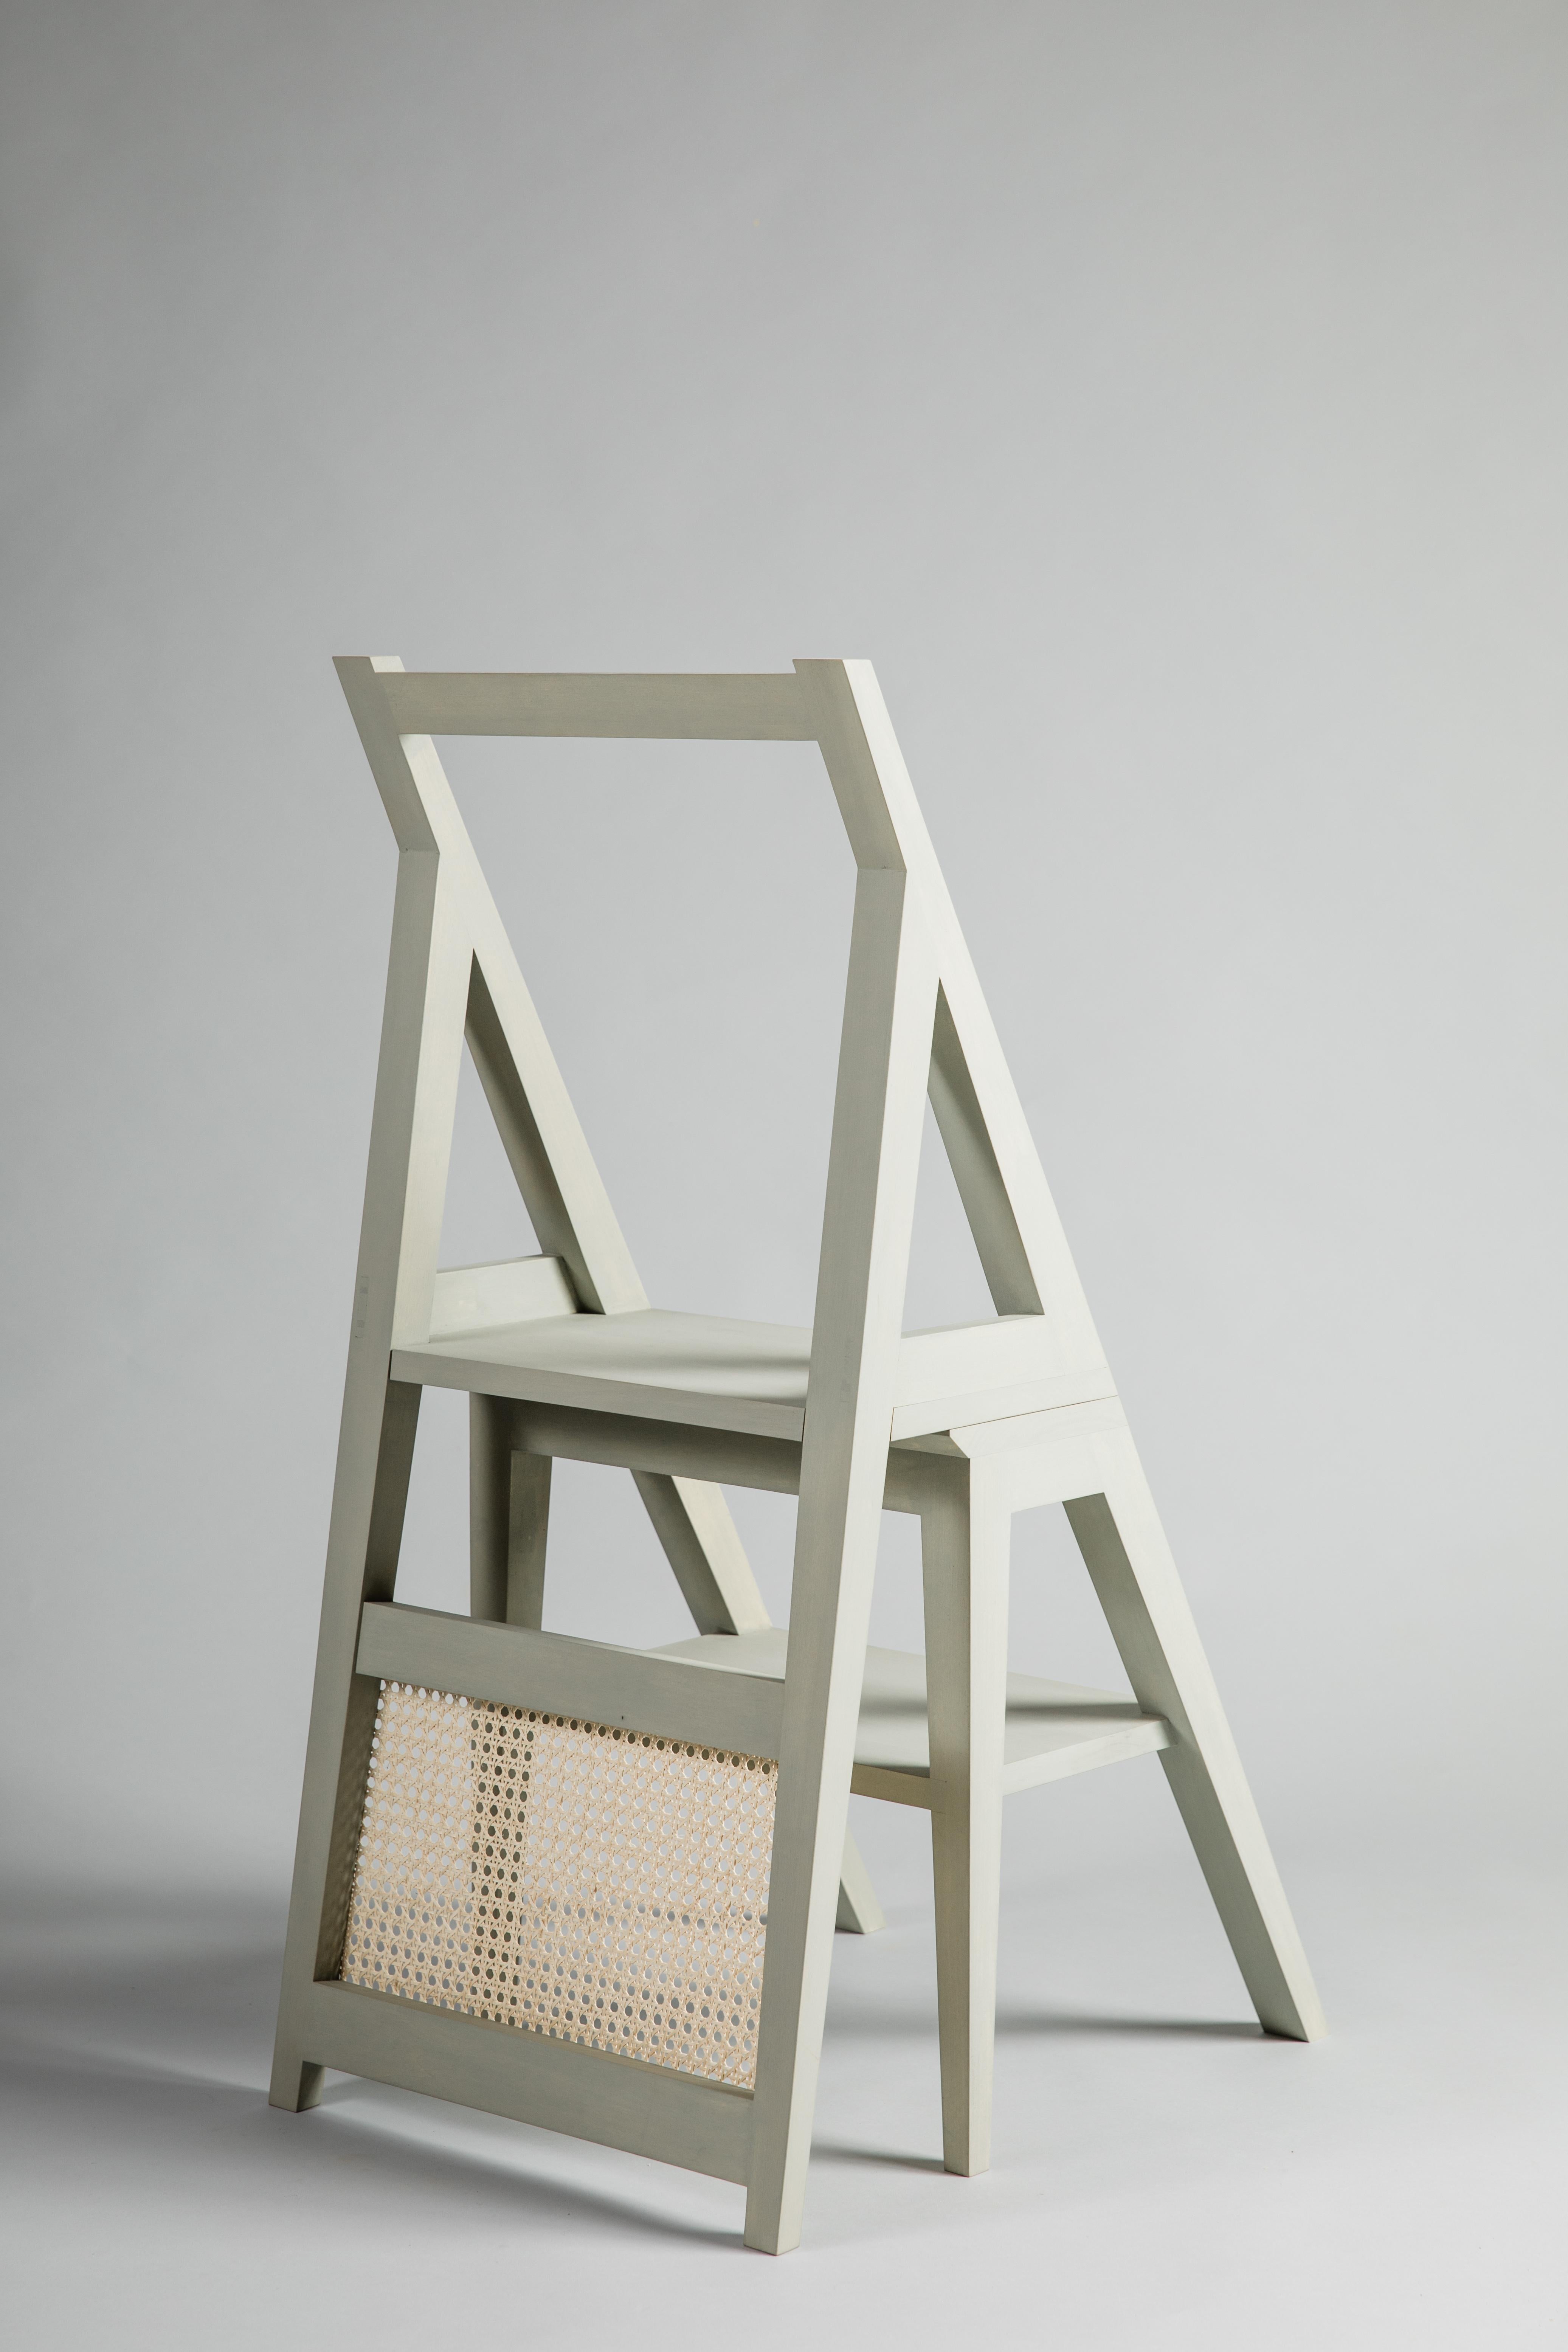 The transforming chair/step stool has been around since the 1700s and continues to be useful to this day. This version is a modern take on the Classic model. It is great for small spaces where you need to reach objects in high places and also